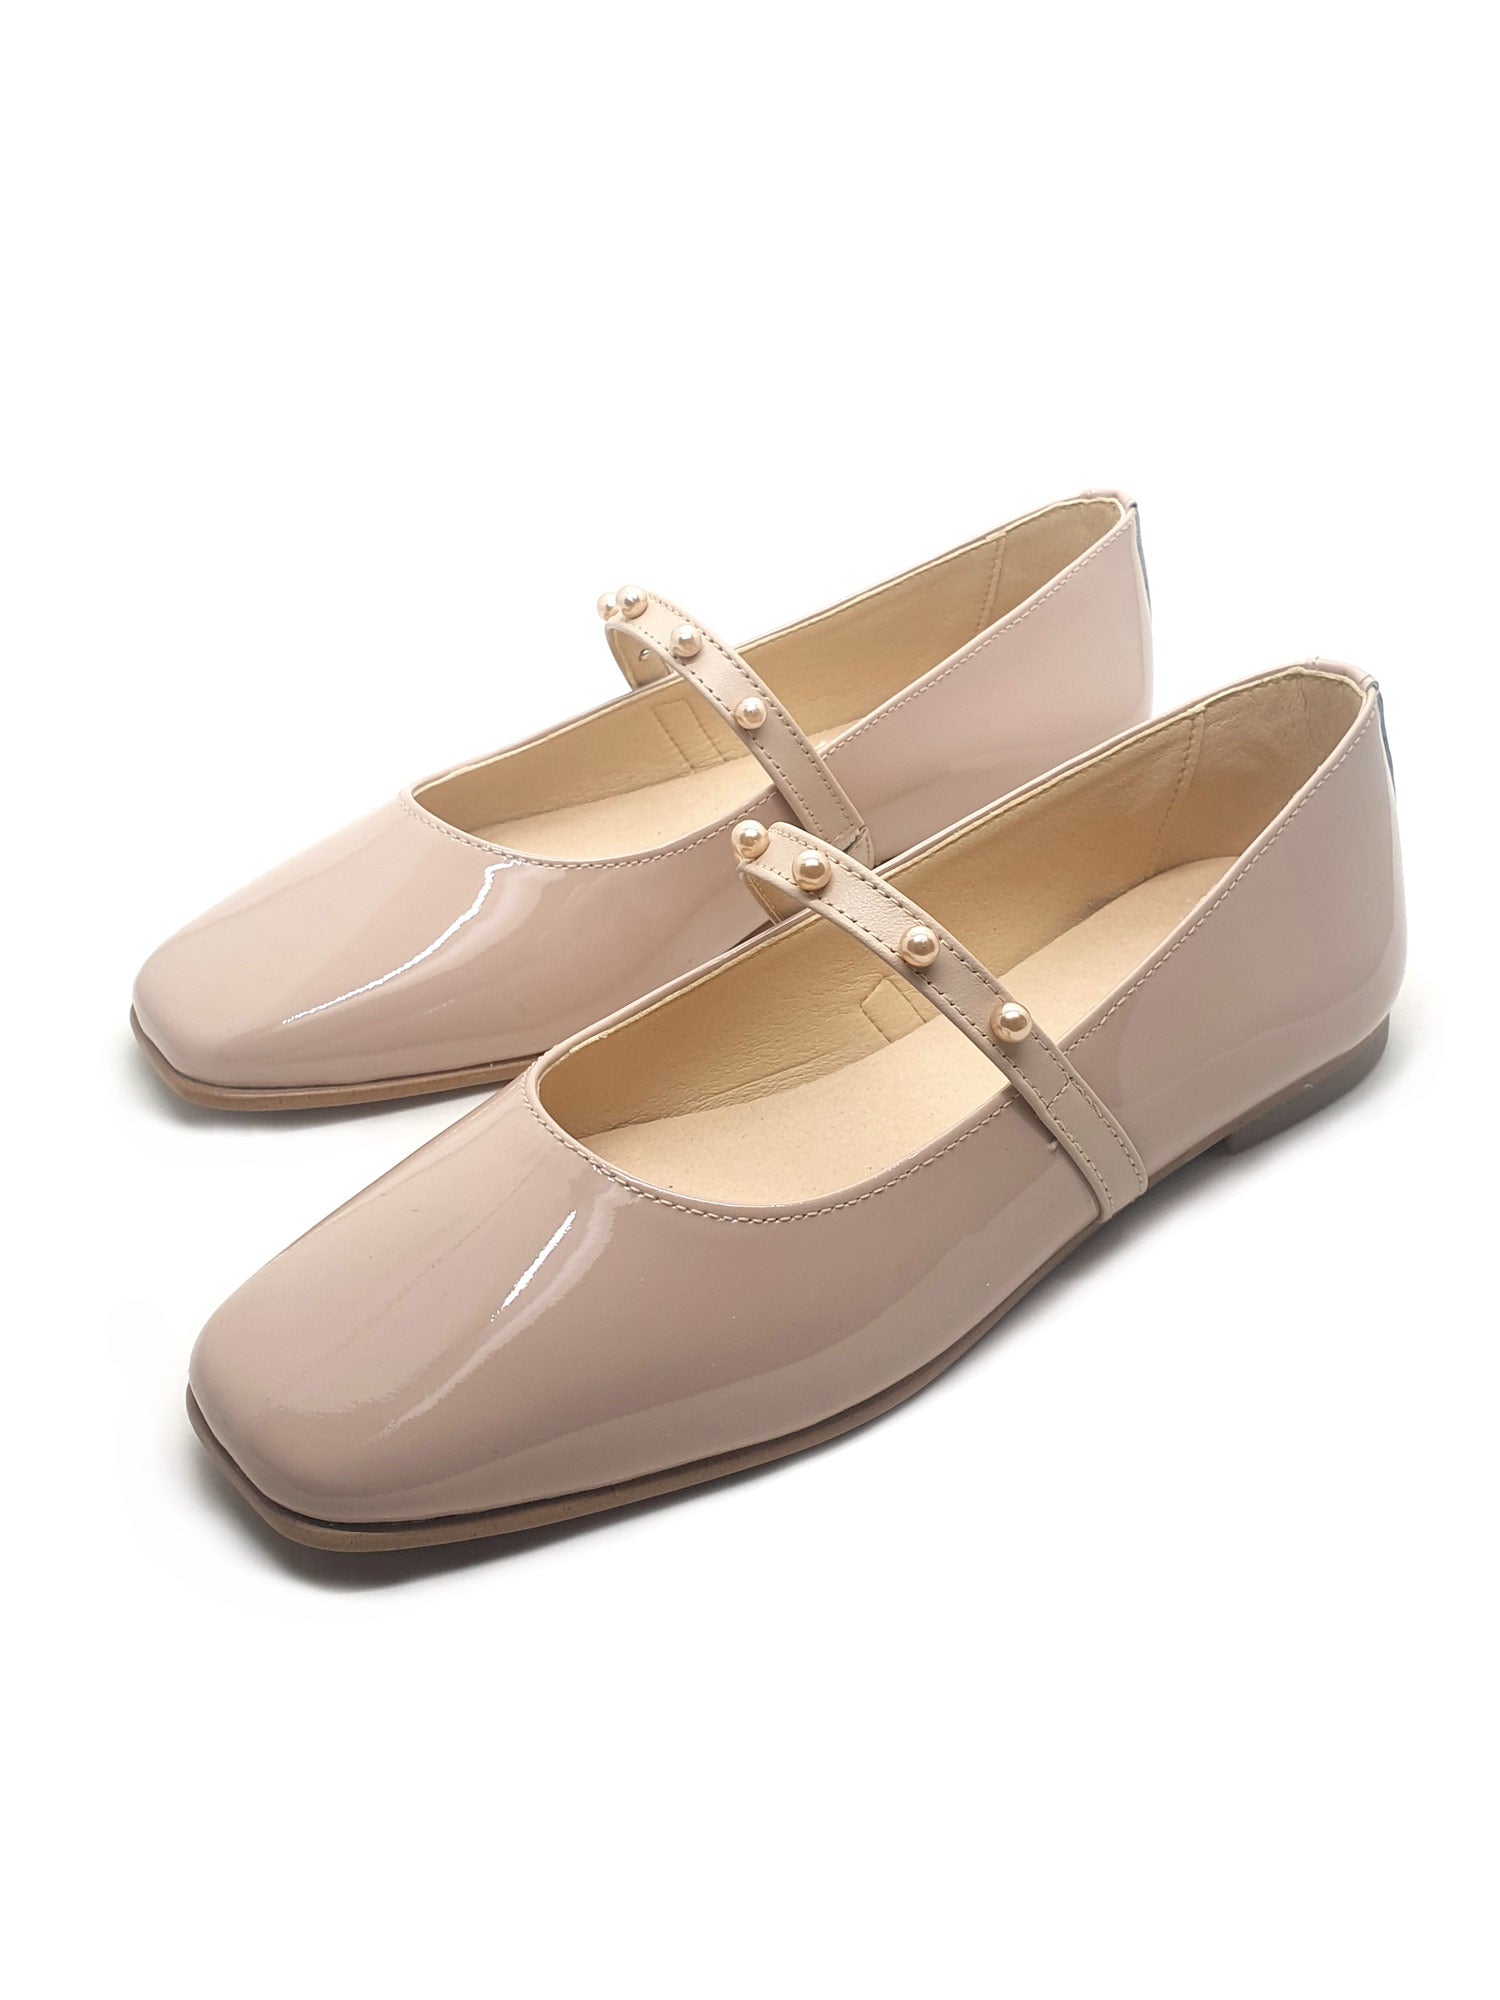 Kid's flat ballerinas leather shoes with pearls